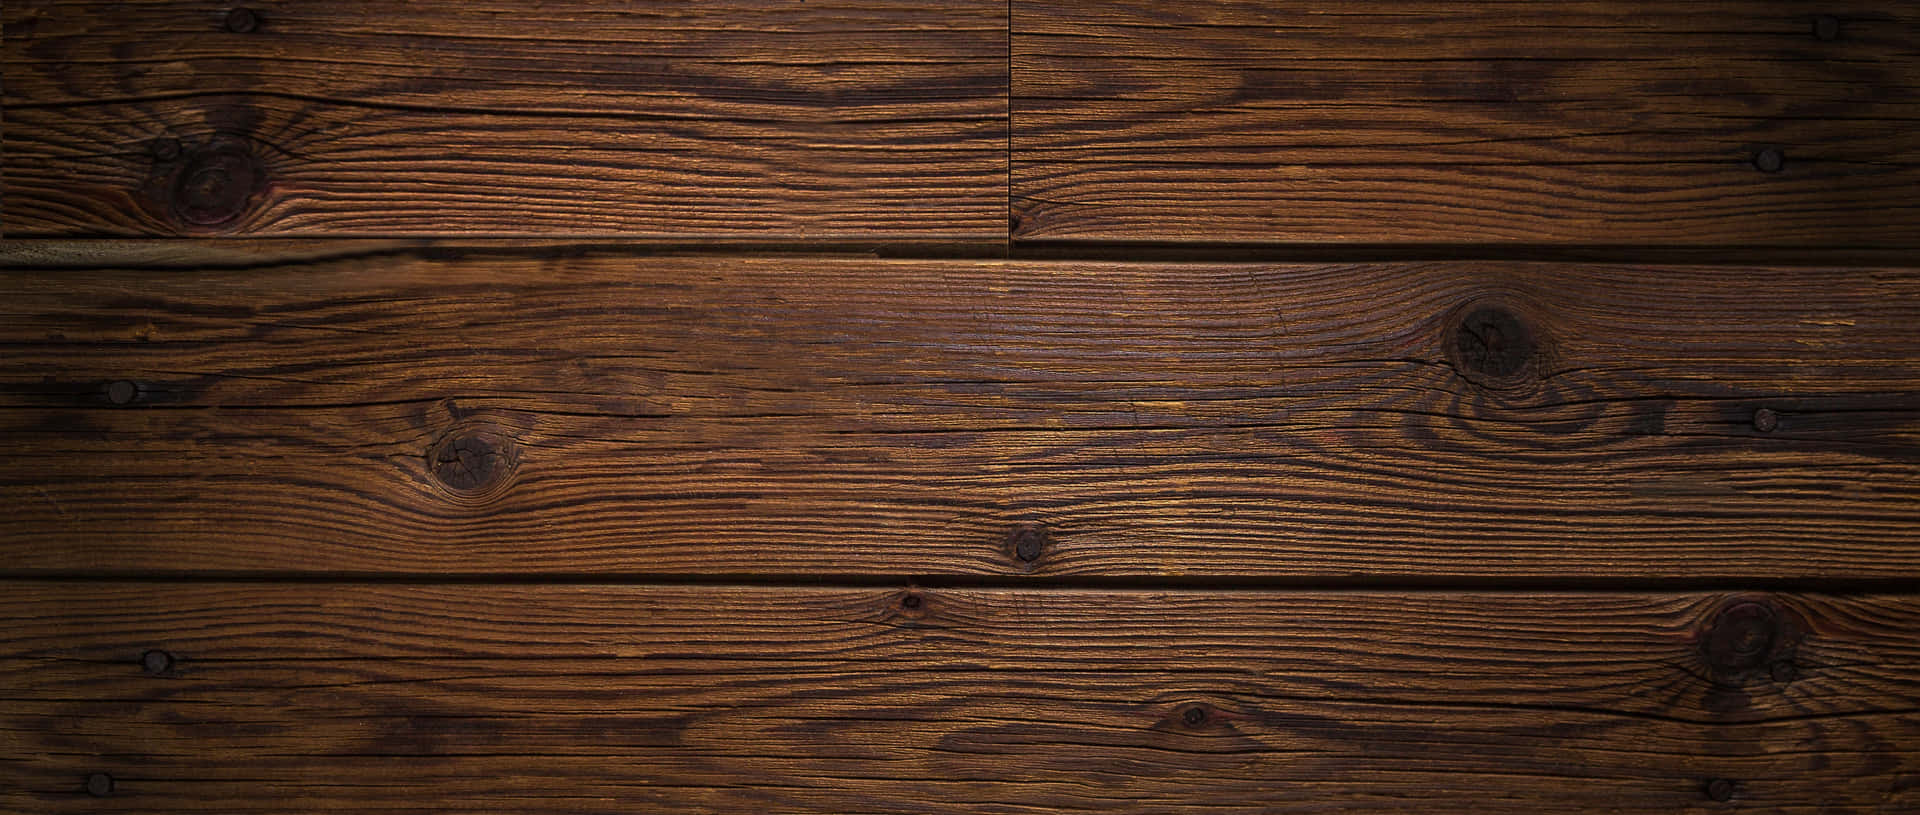 A Wooden Wall With A Dark Brown Color